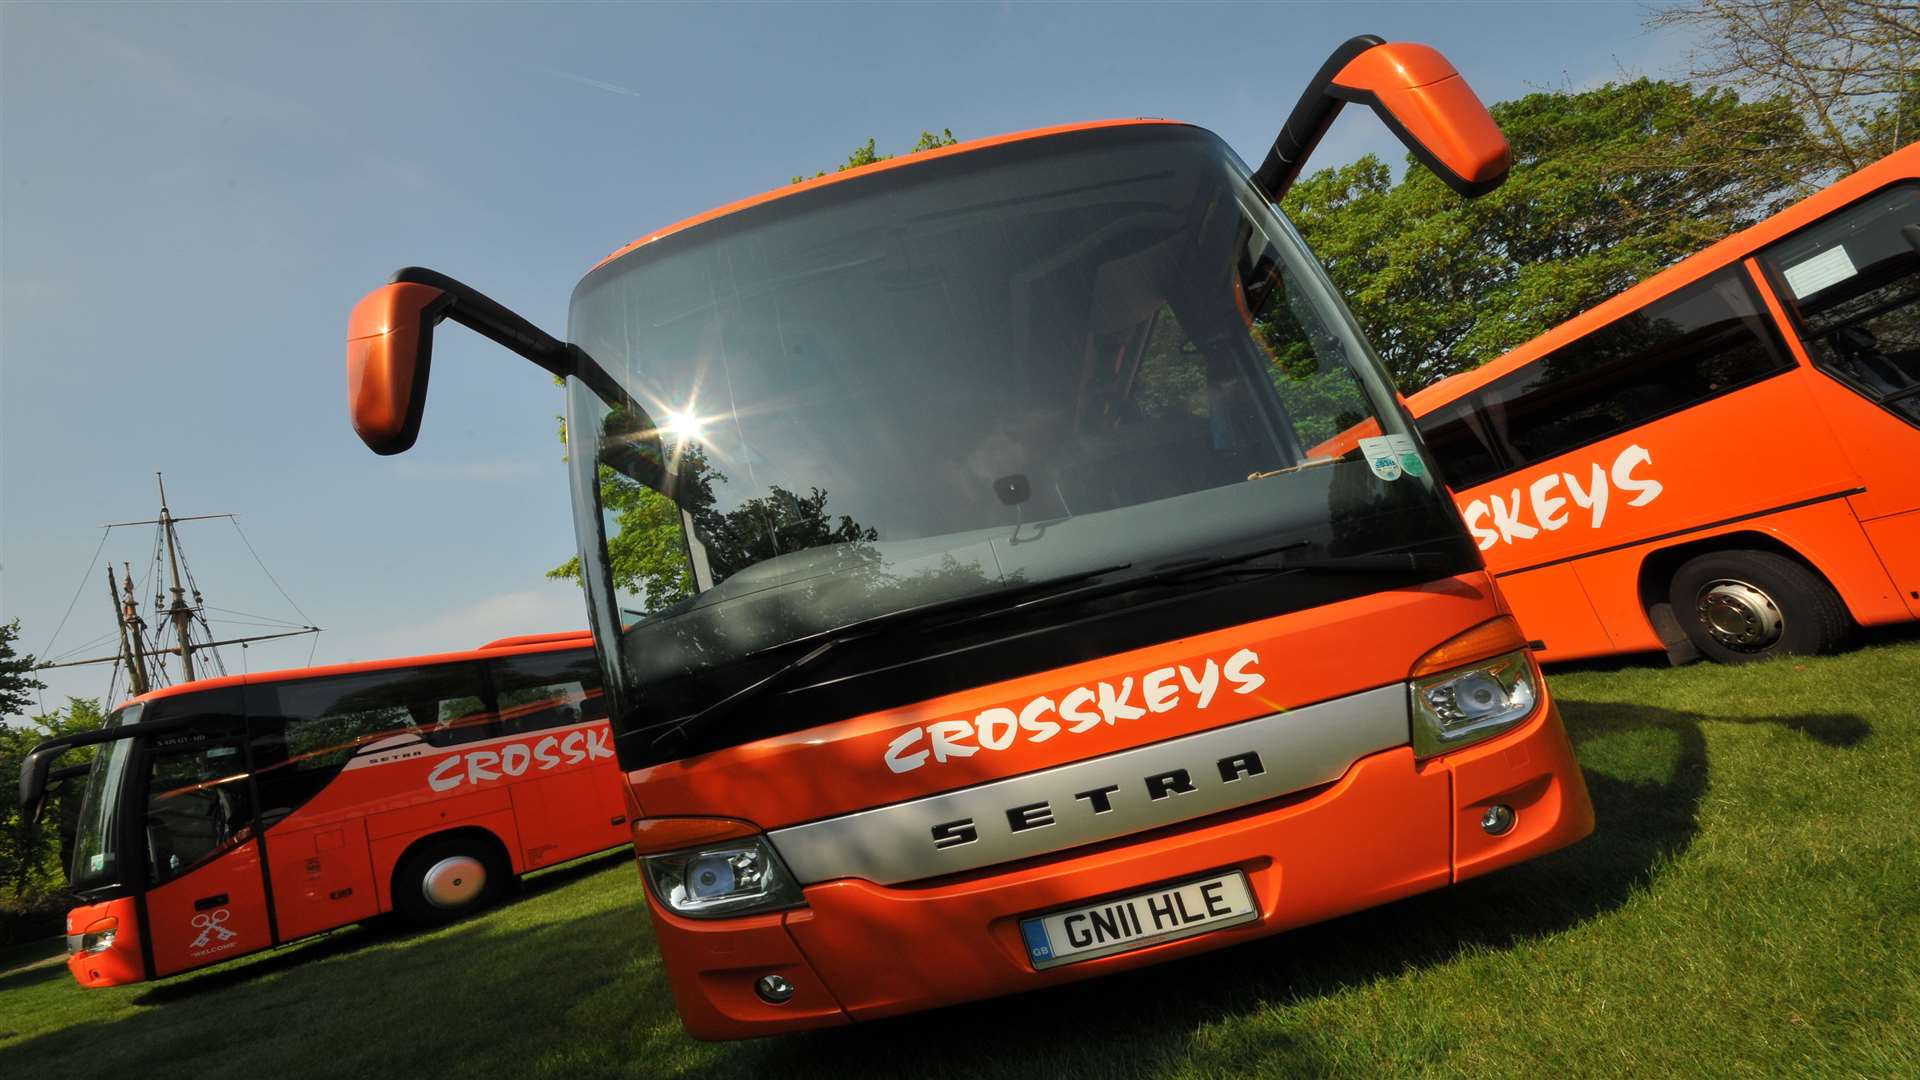 Travel to Detling in style with Crosskeys